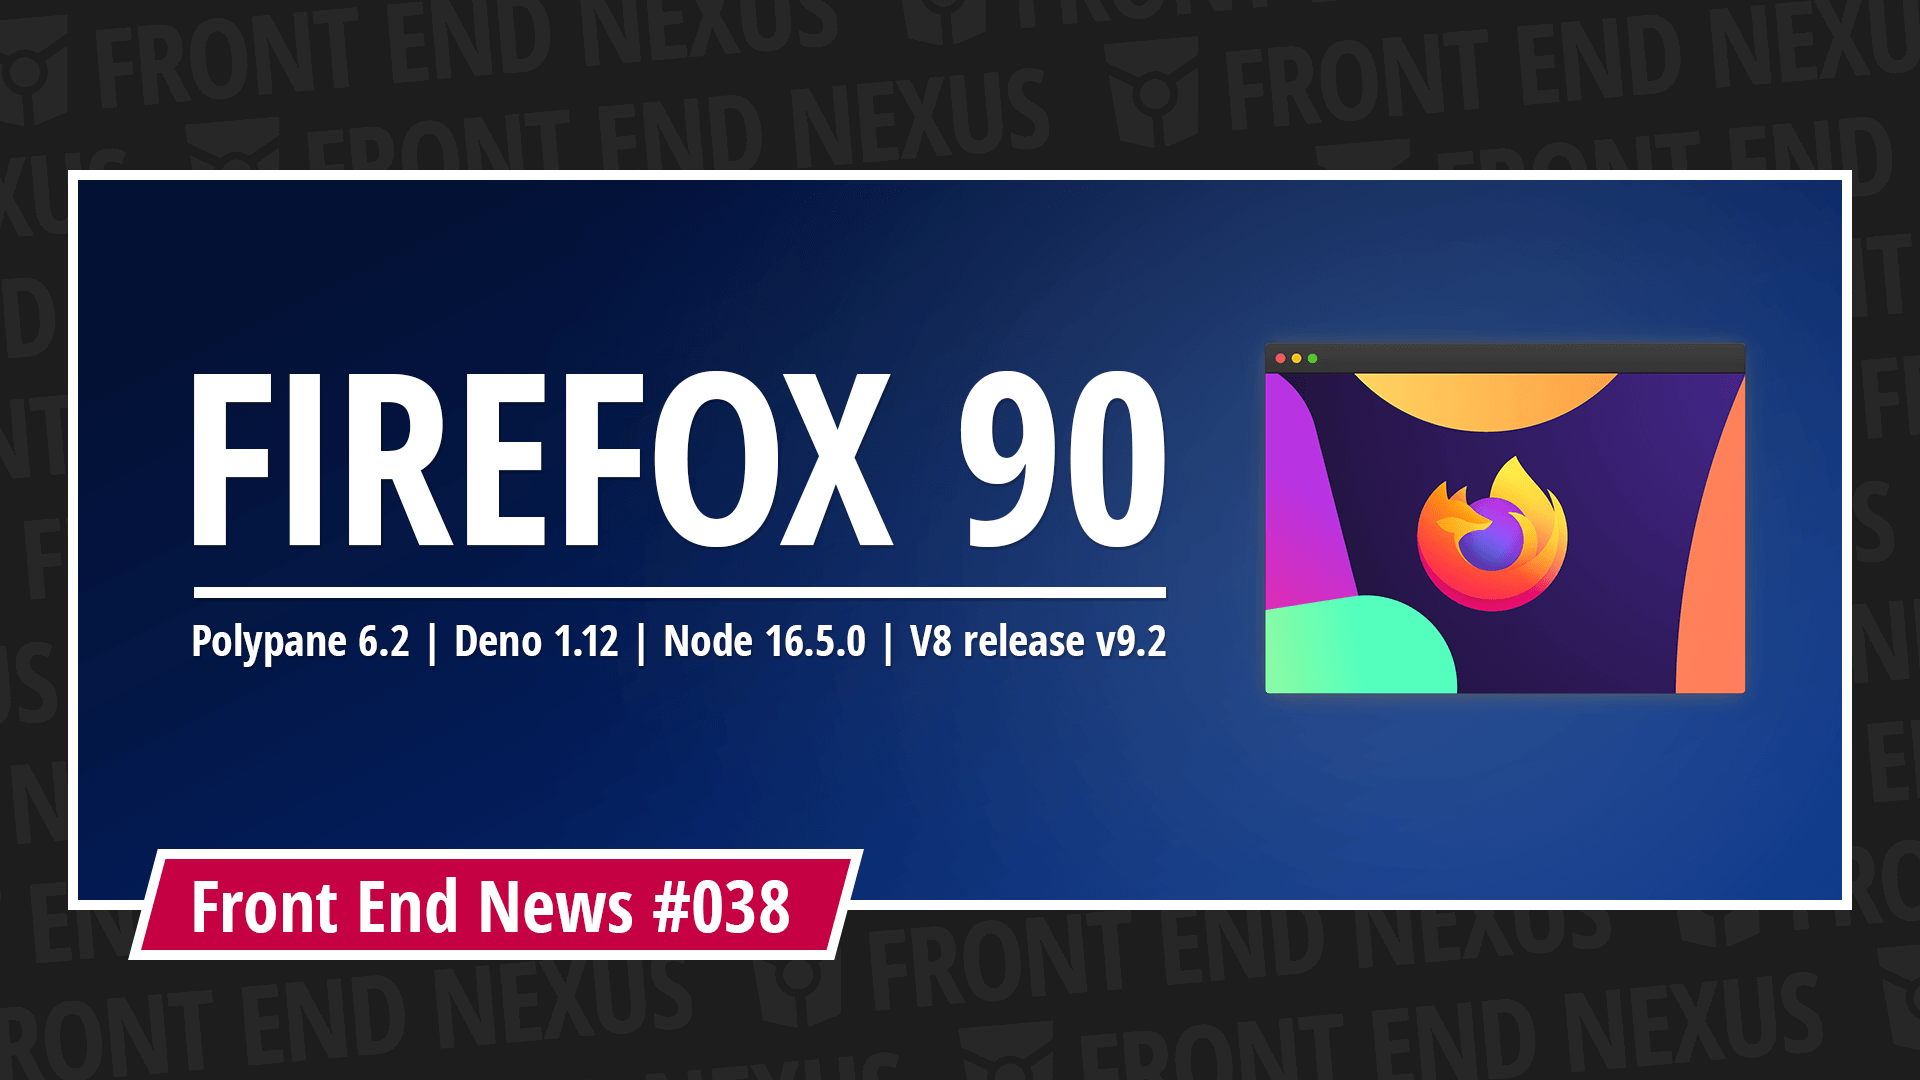 New updates and releases: Firefox 90, Polypane 6.2, Deno 1.12, Node 16.5.0, V8 release v9.2, and more | Front End News #038